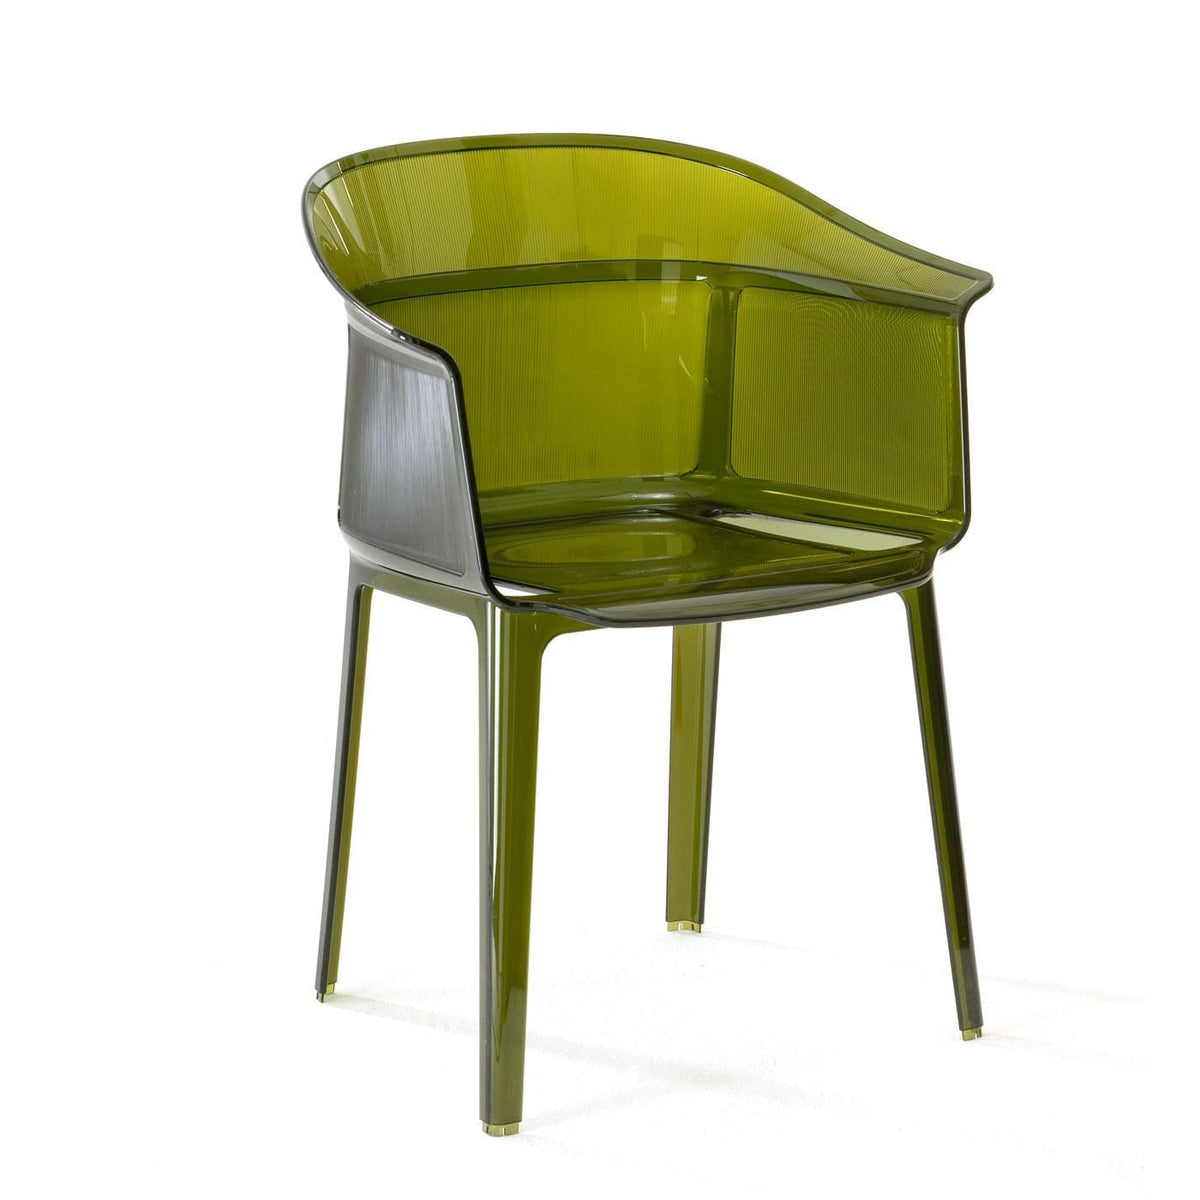 A transparent green chair with a high back by Kartell.